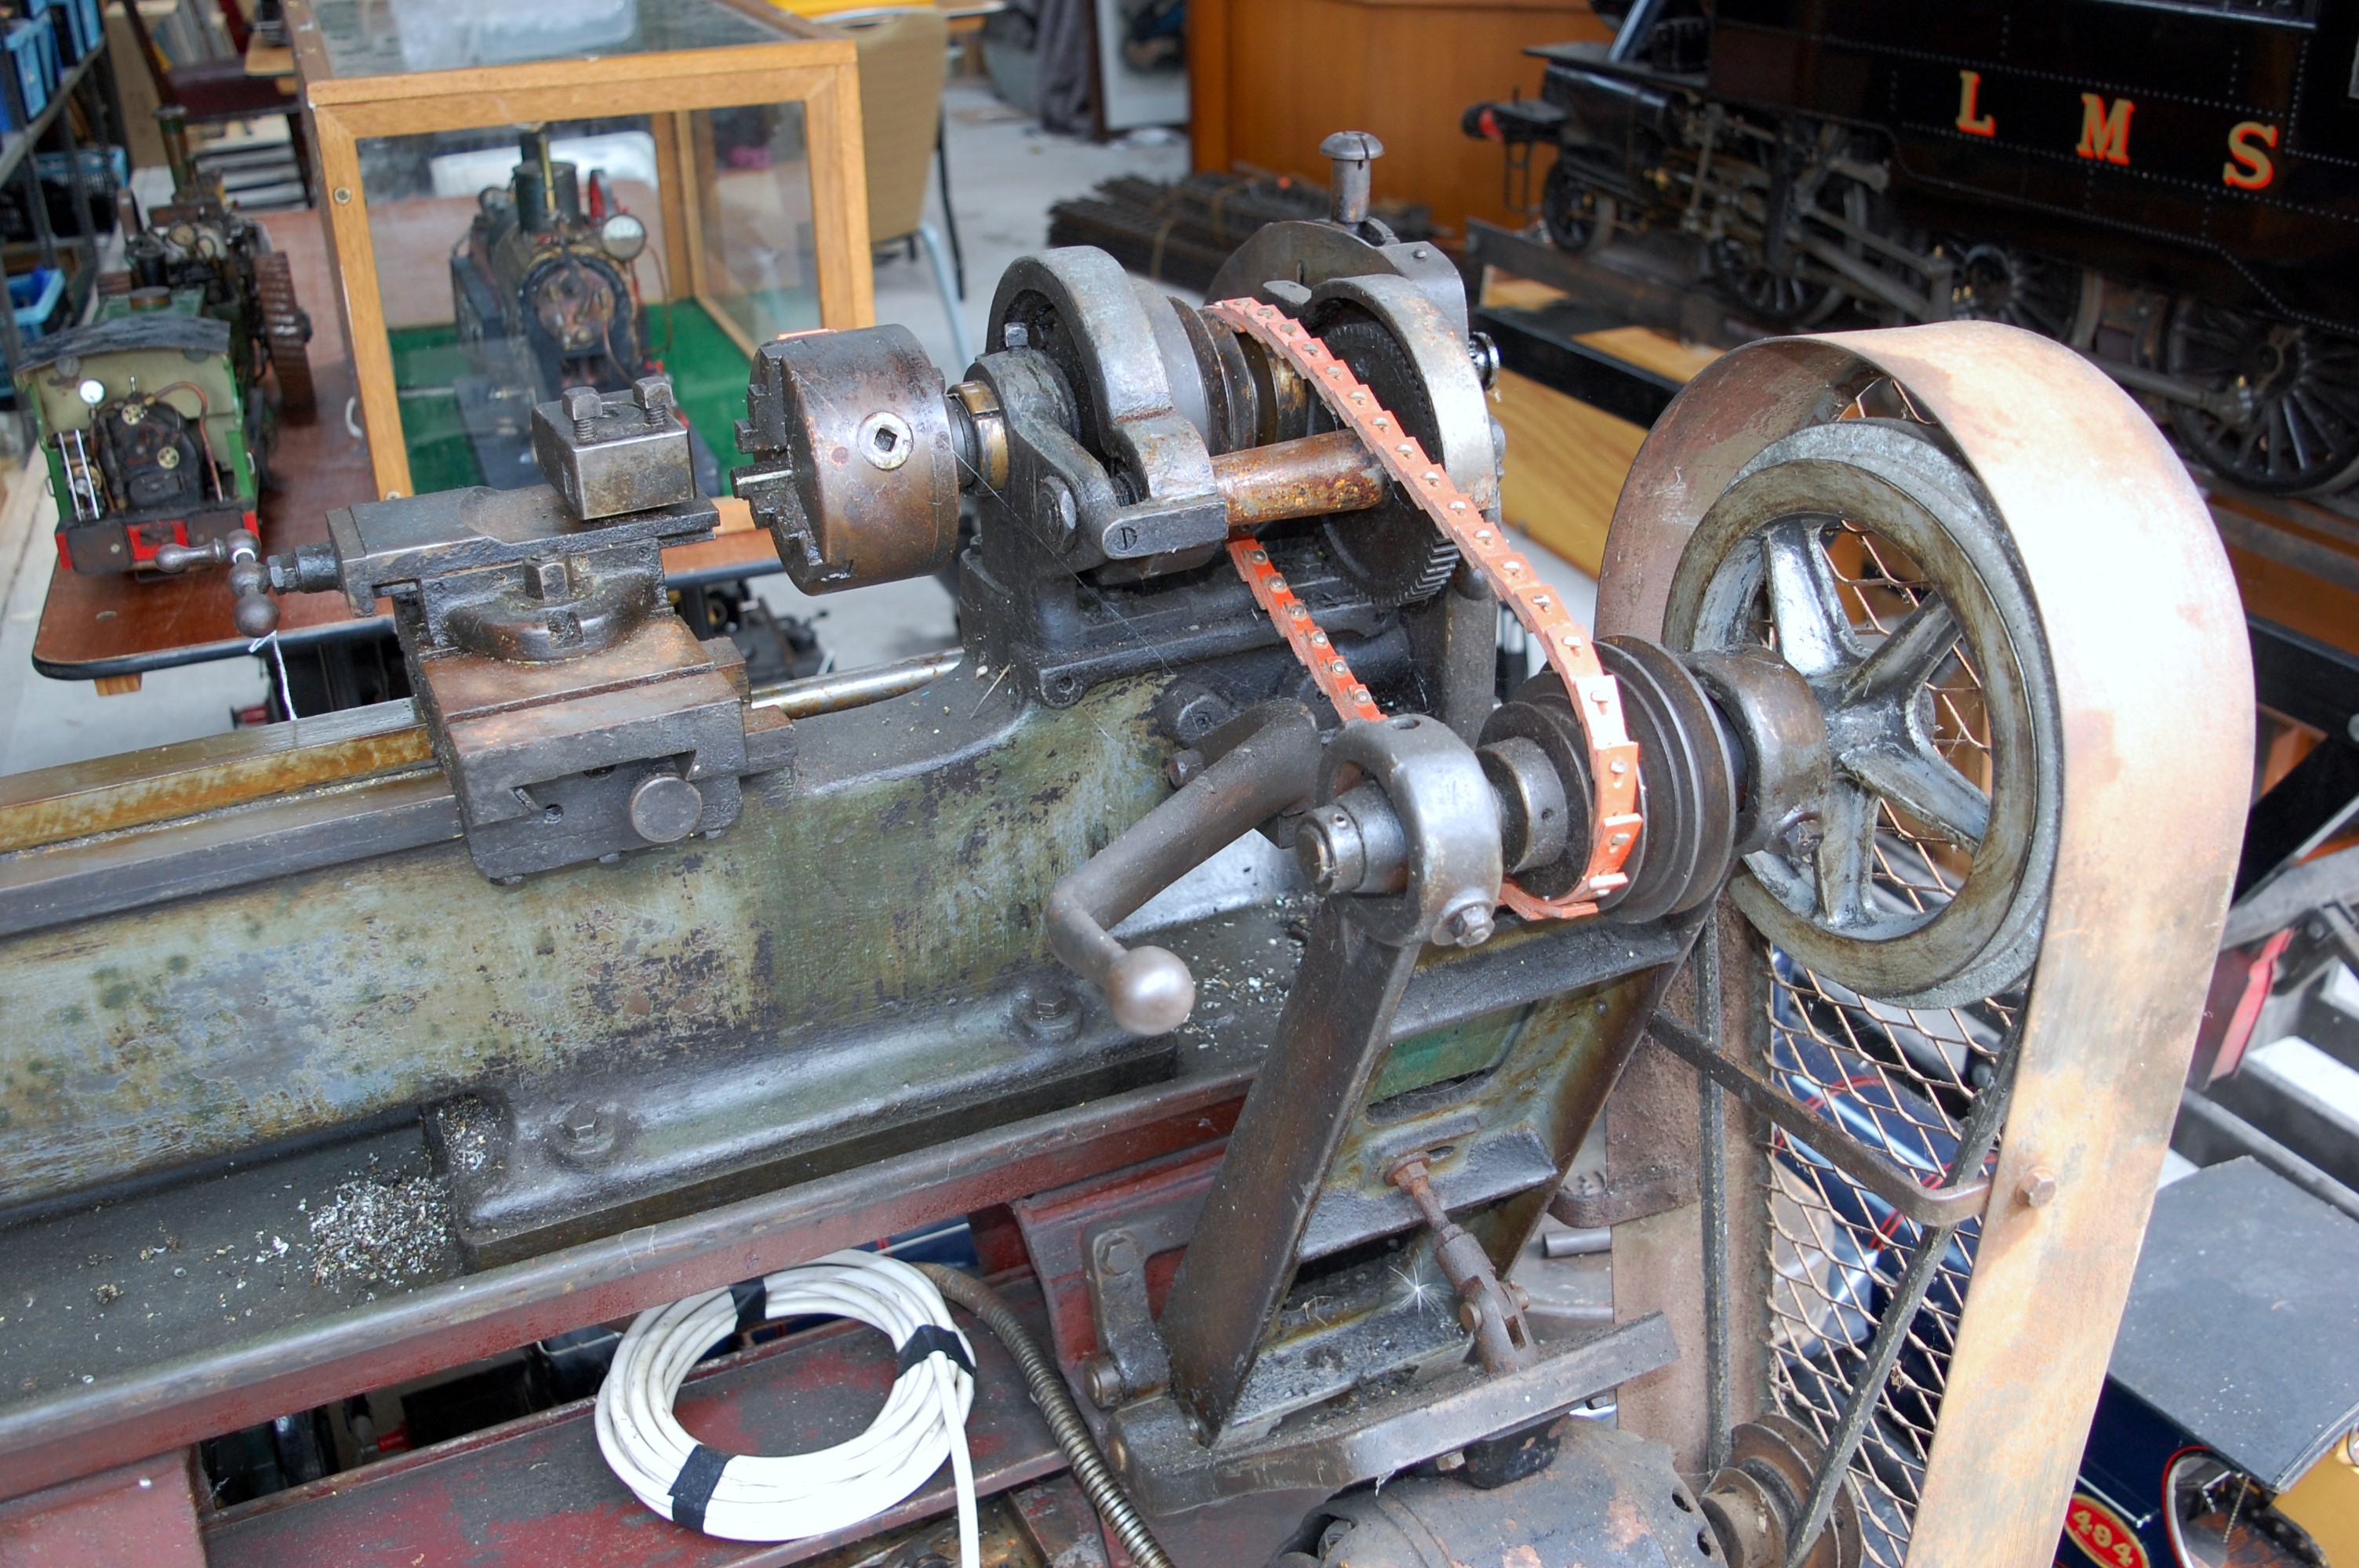 Myford Reg No 53975 circa 1940's workshop lathe with 3-4 chuck fitted, - Image 3 of 3